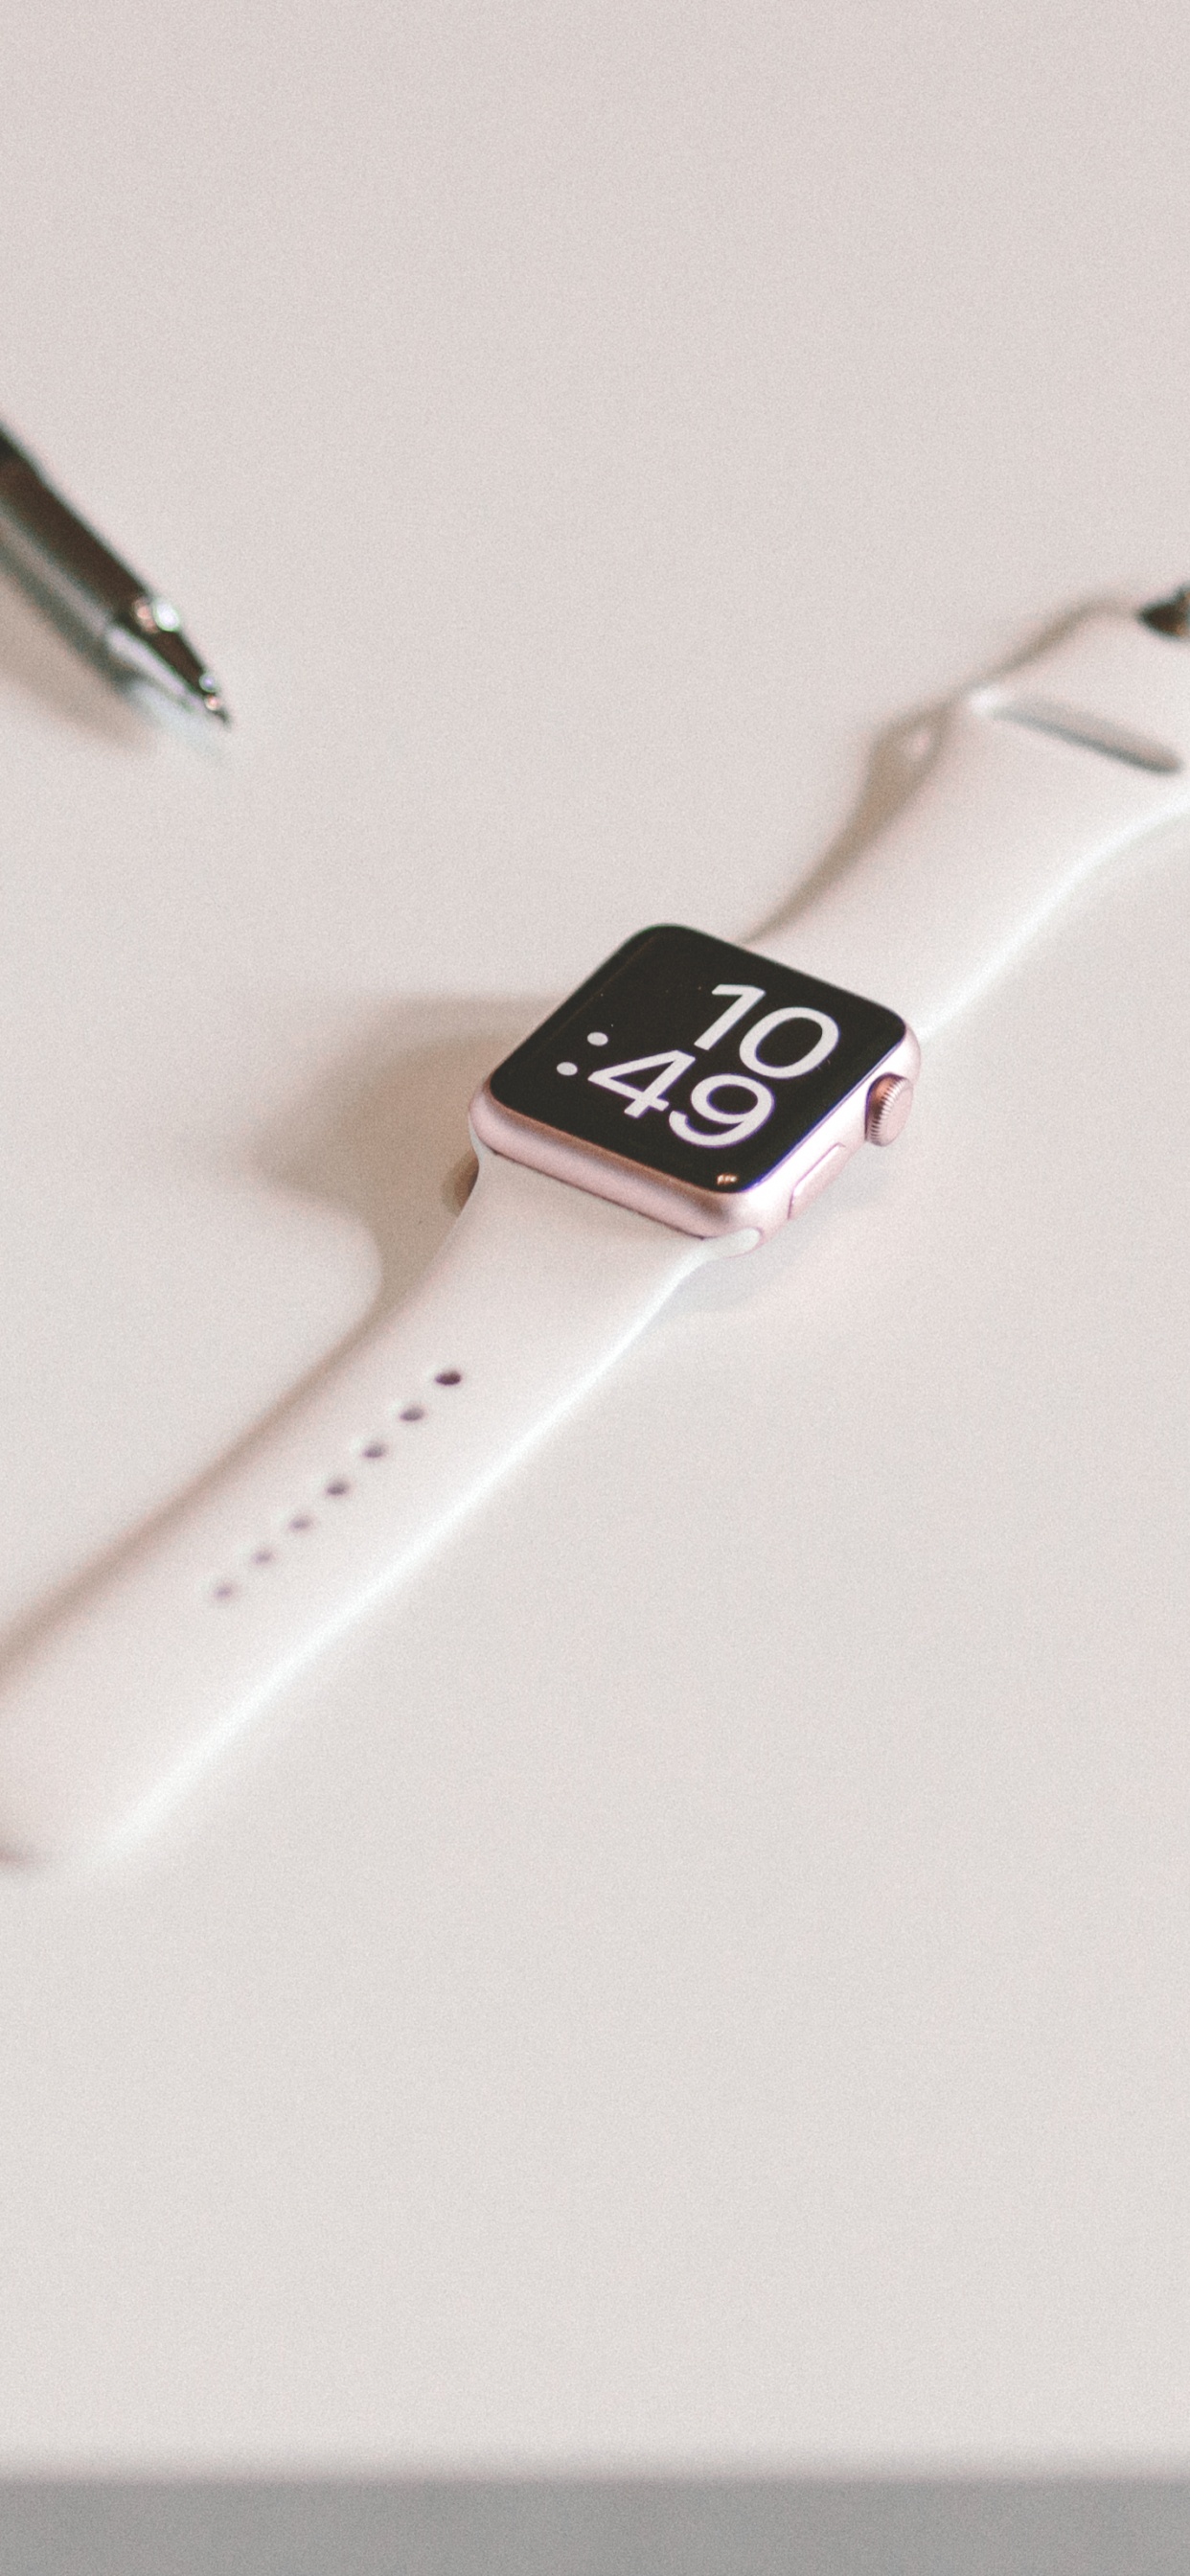 Silver Apple Watch With White Sport Band Beside Black Click Pen. Wallpaper in 1242x2688 Resolution